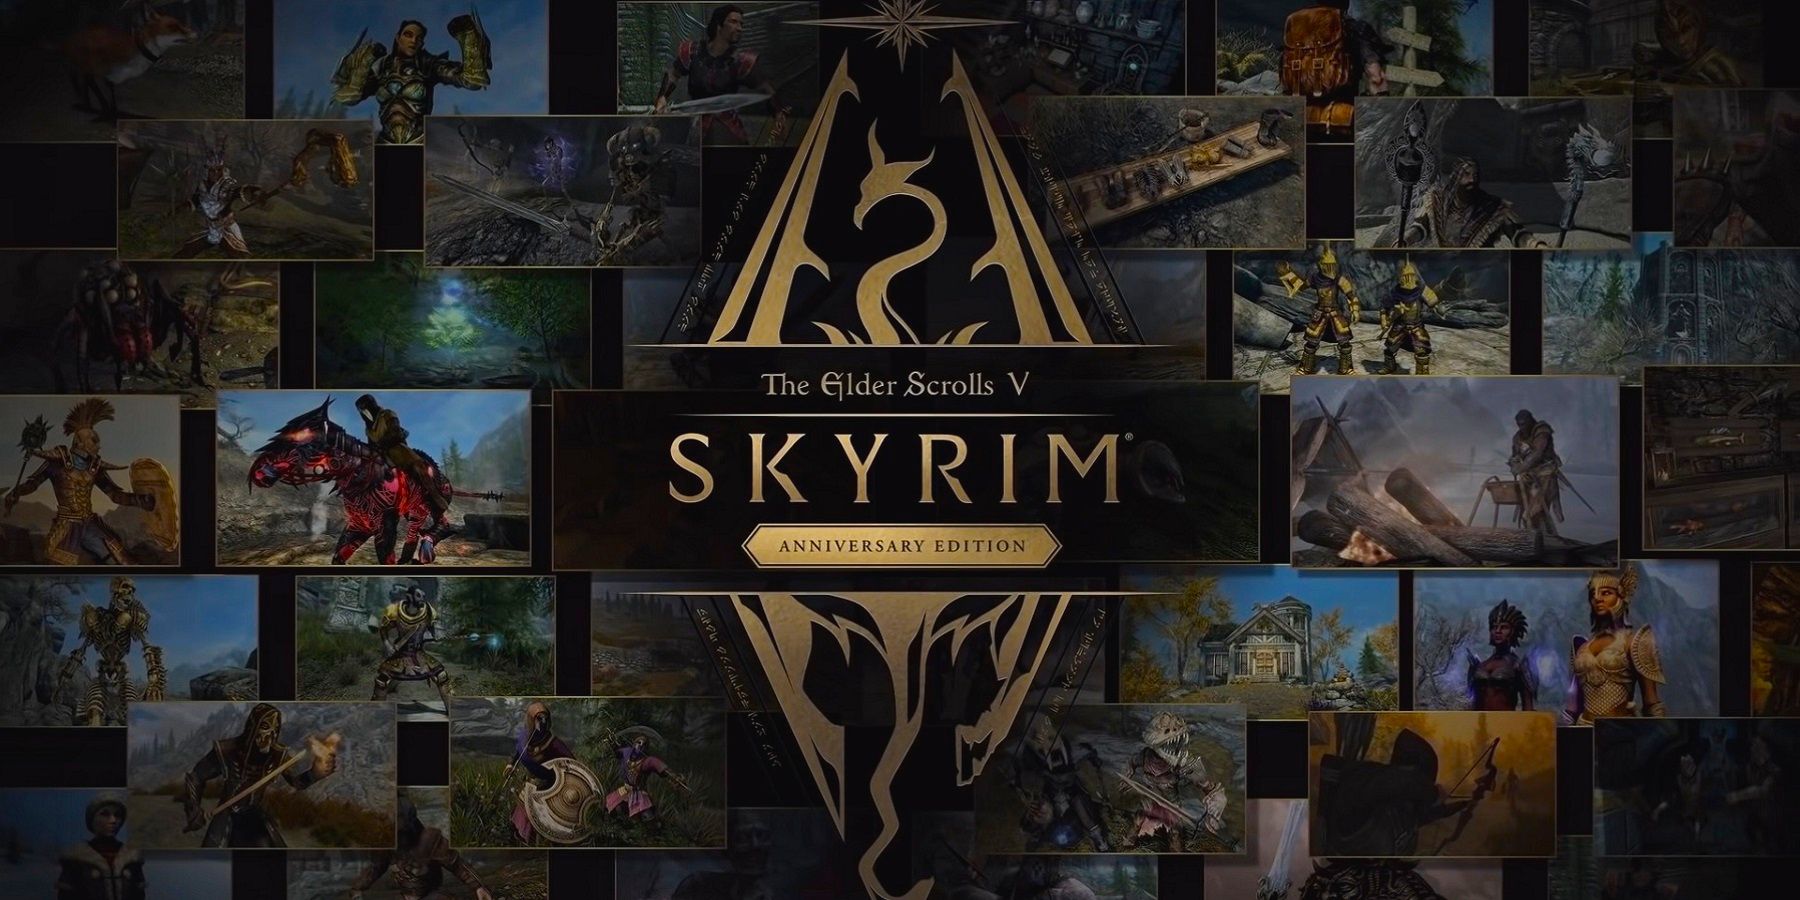 Skyrim Anniversary Edition logo in the middle with screenshots from the game in the background.